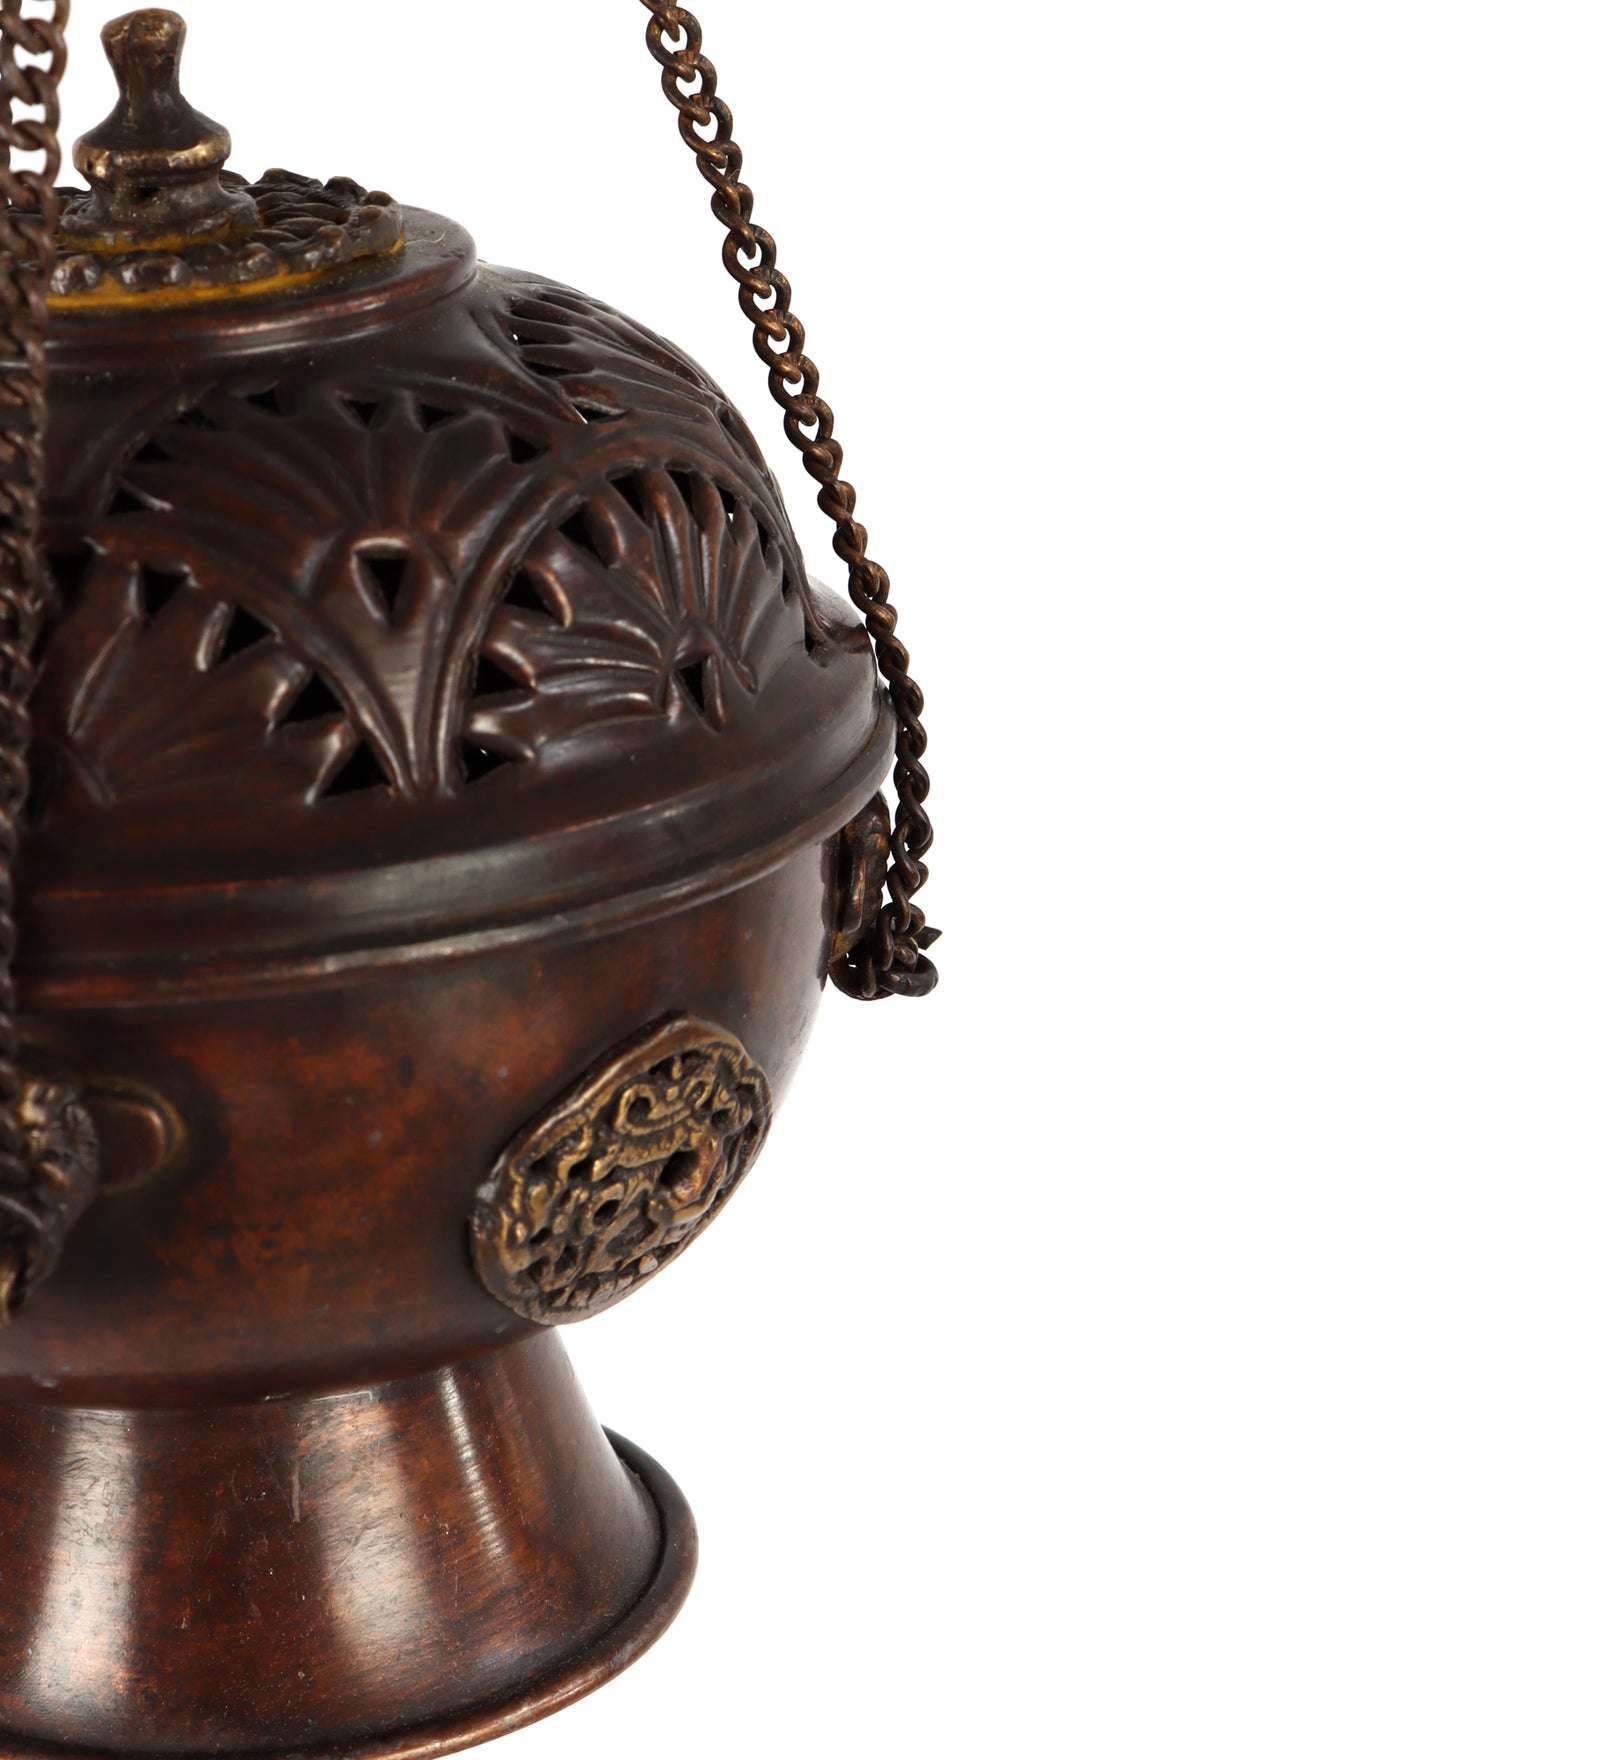 The Smokey Goblet (Brown) - Hanging Incense Holder